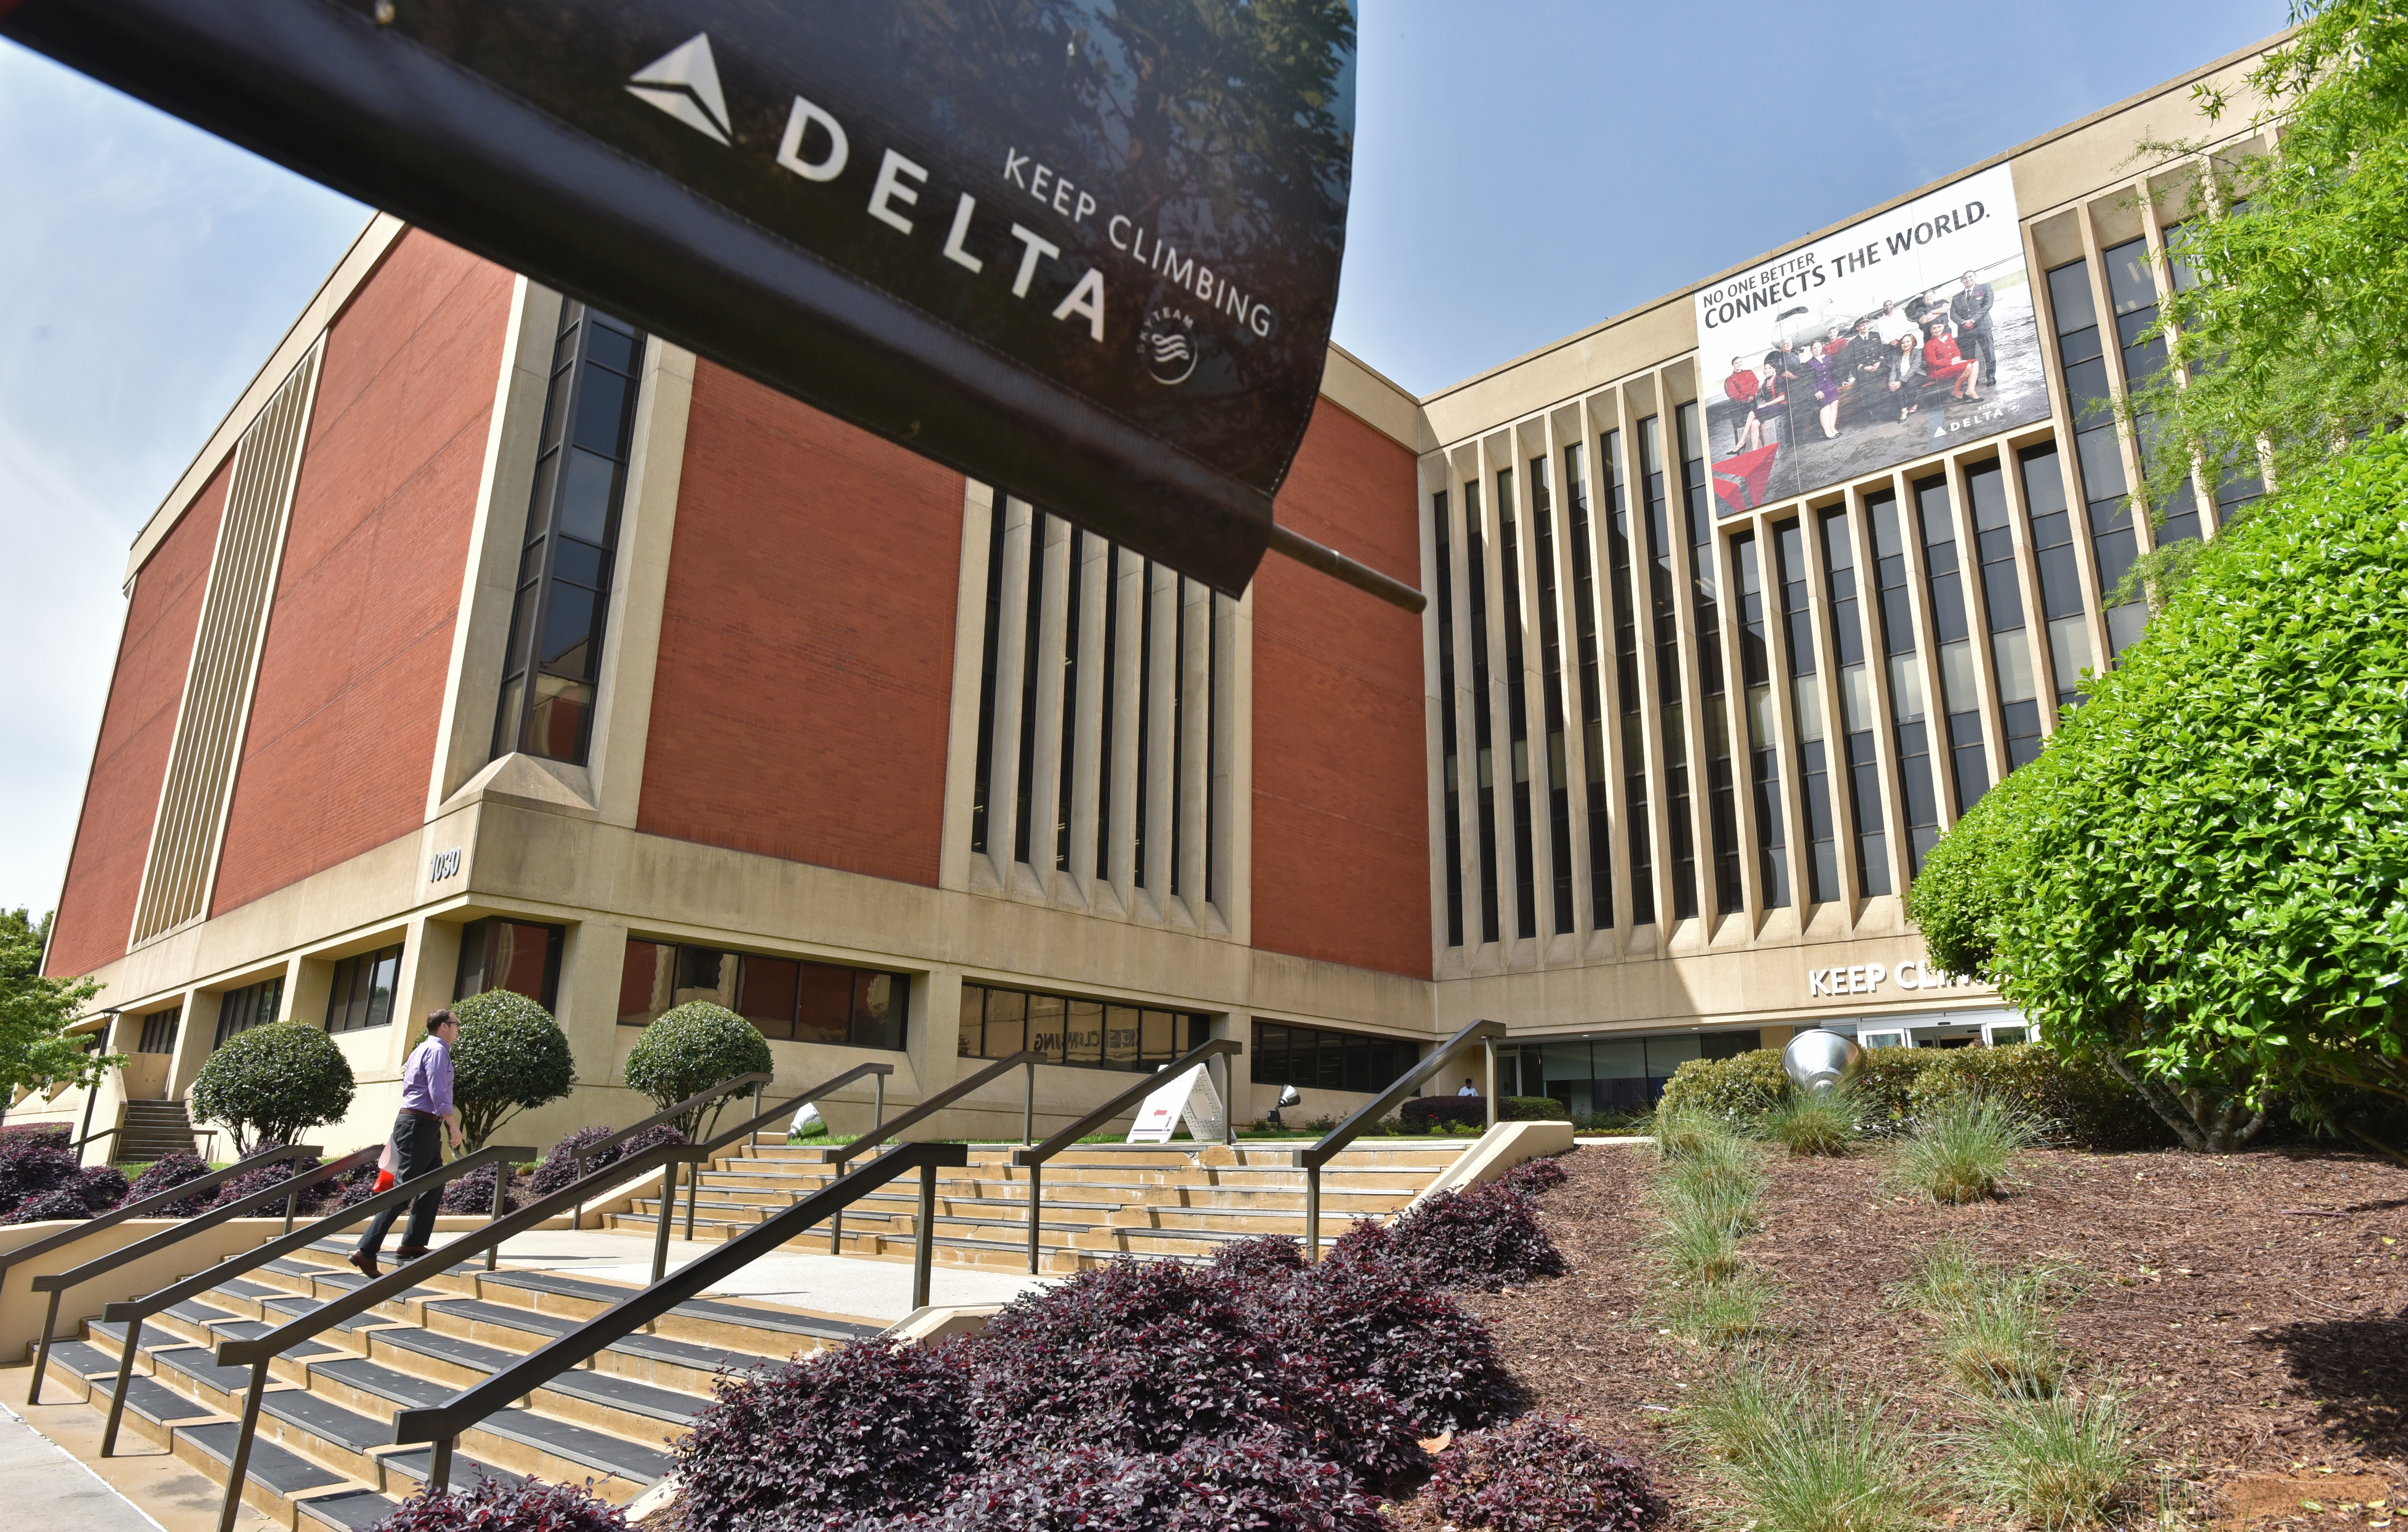 PHOTOS: Take a look inside Delta's headquarters